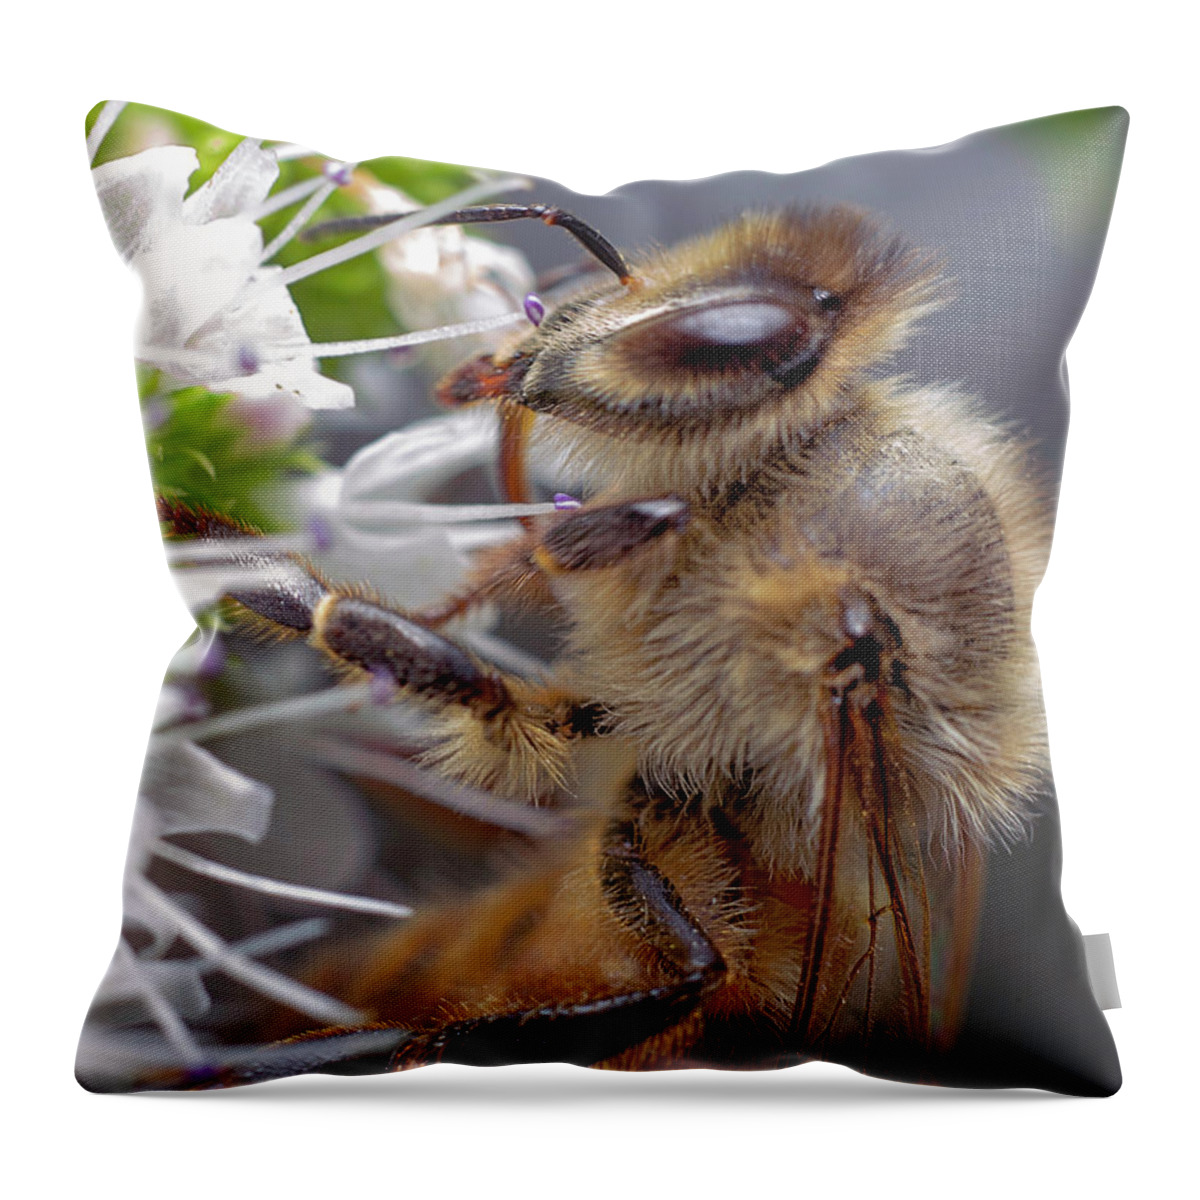 Bee Throw Pillow featuring the photograph Bee 1 #1 by Endre Balogh